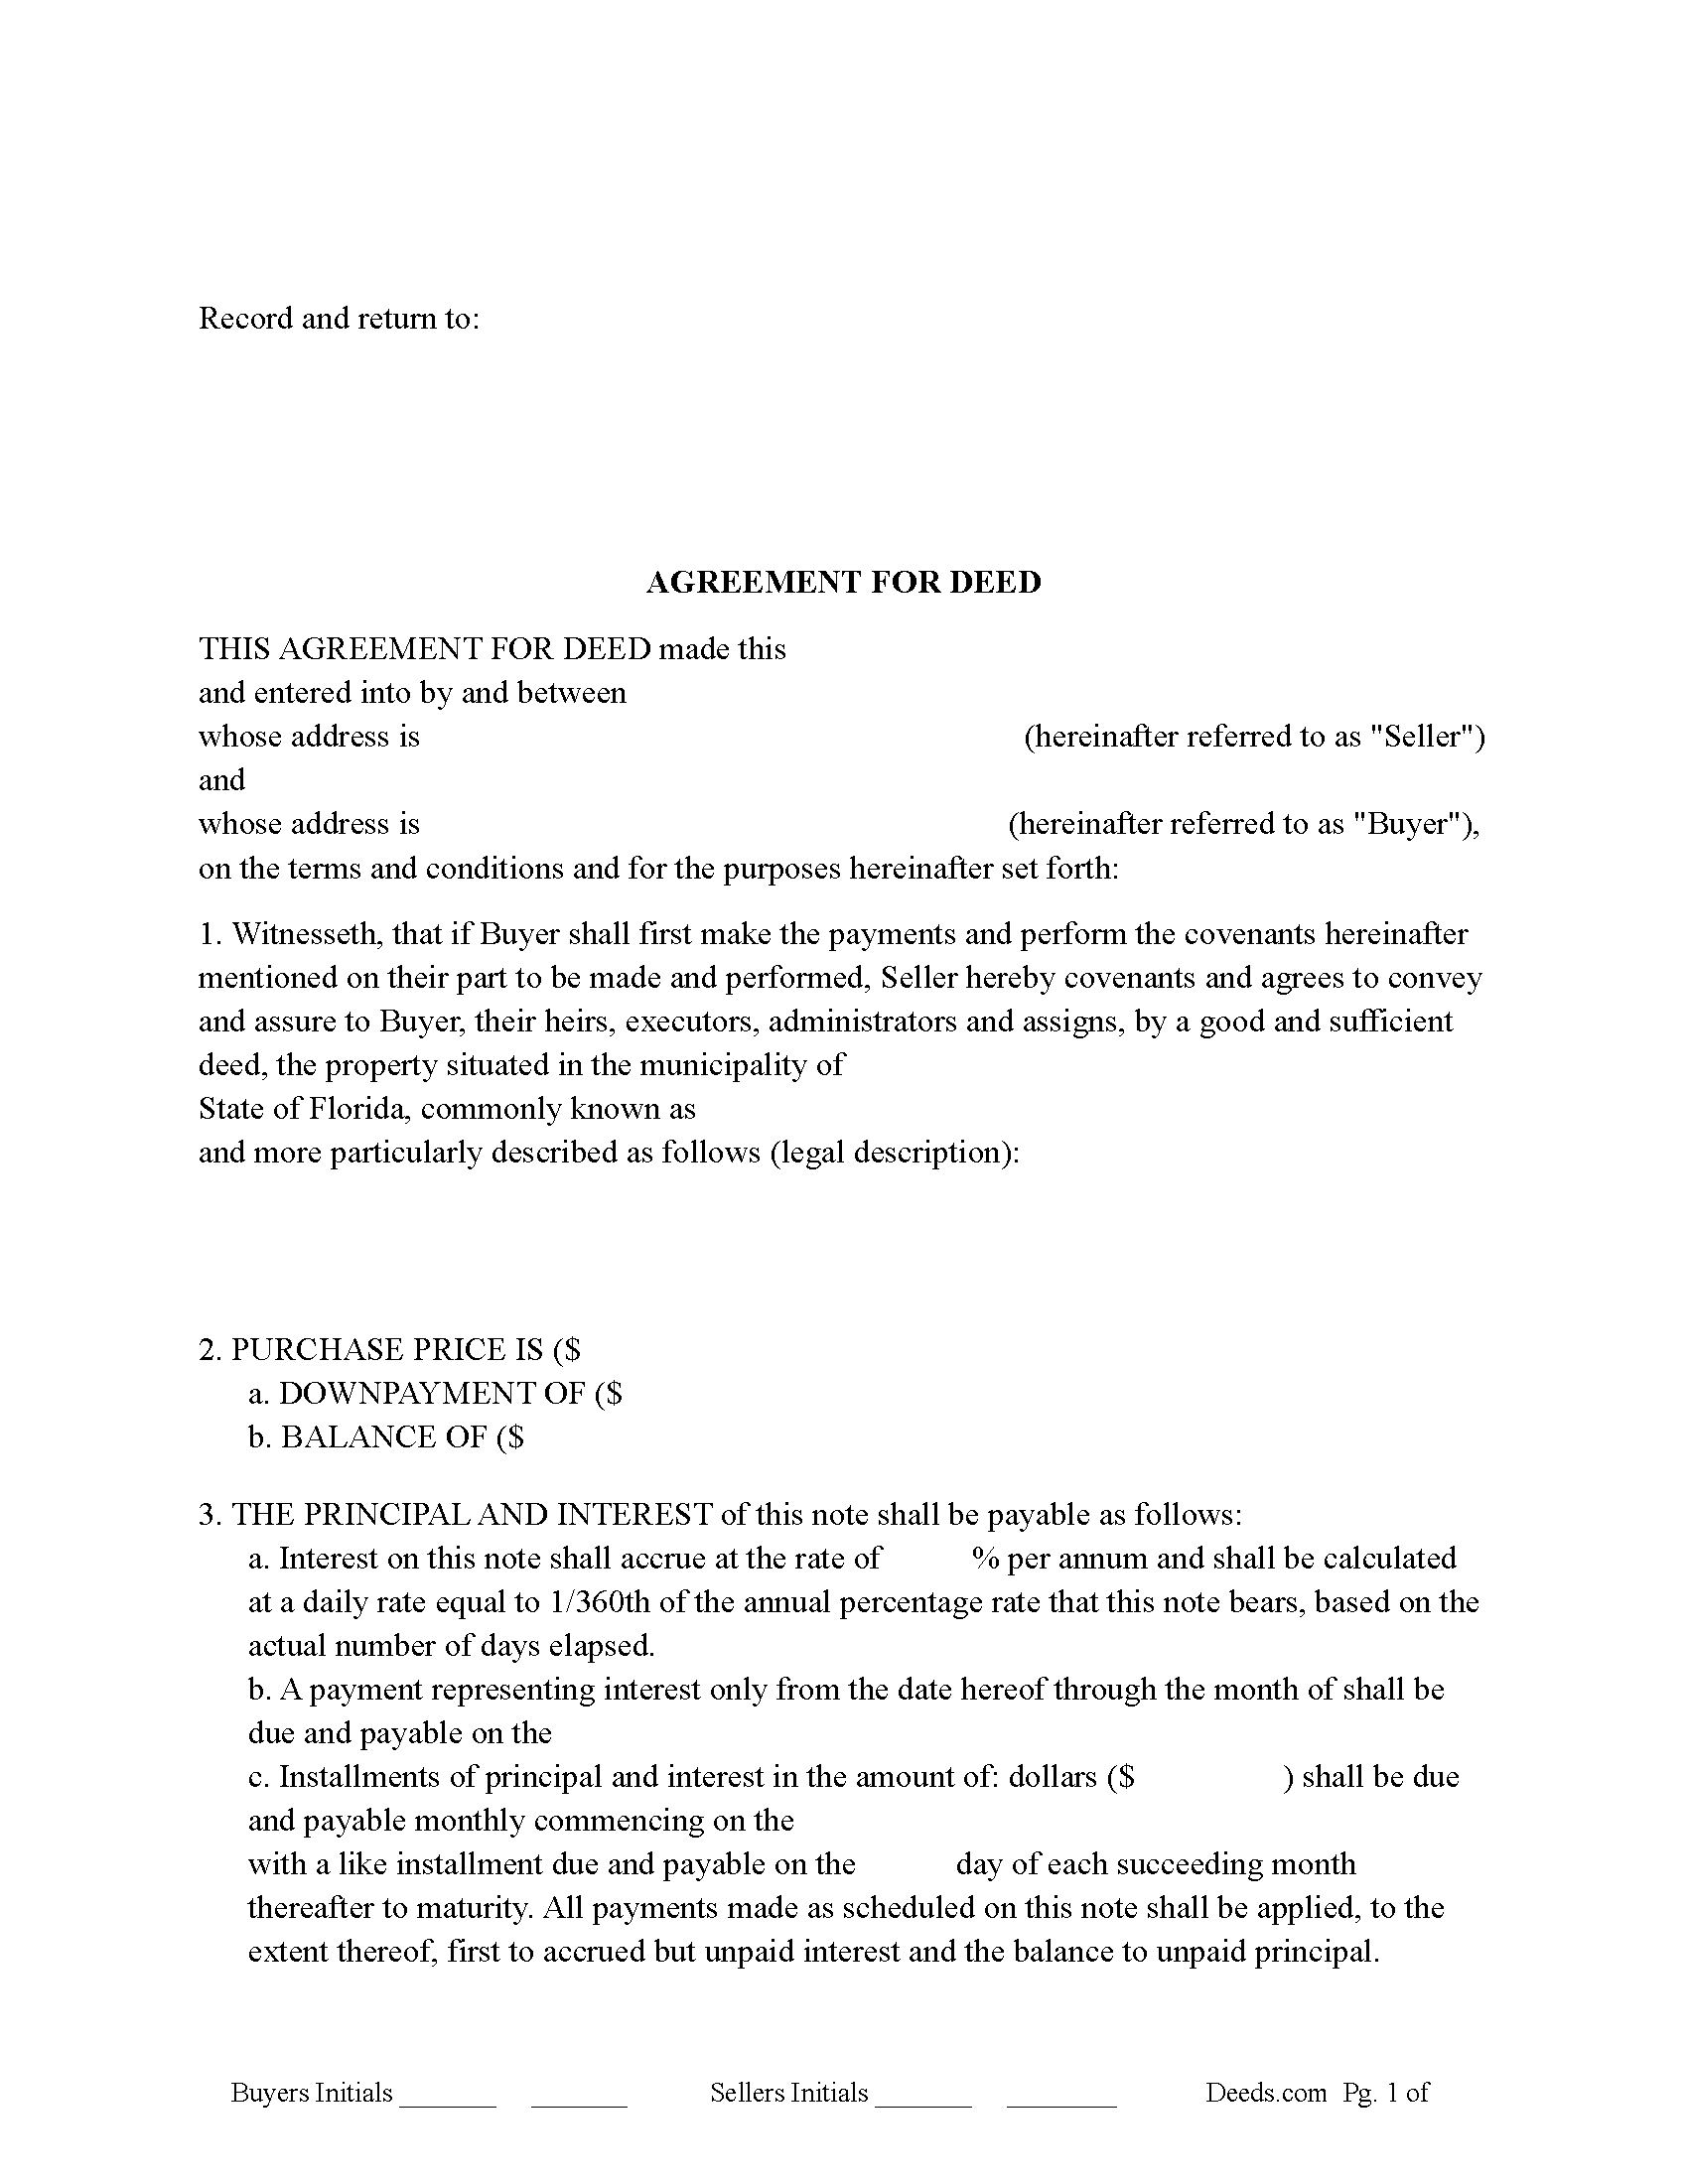 Nassau County Agreement for Deed Form